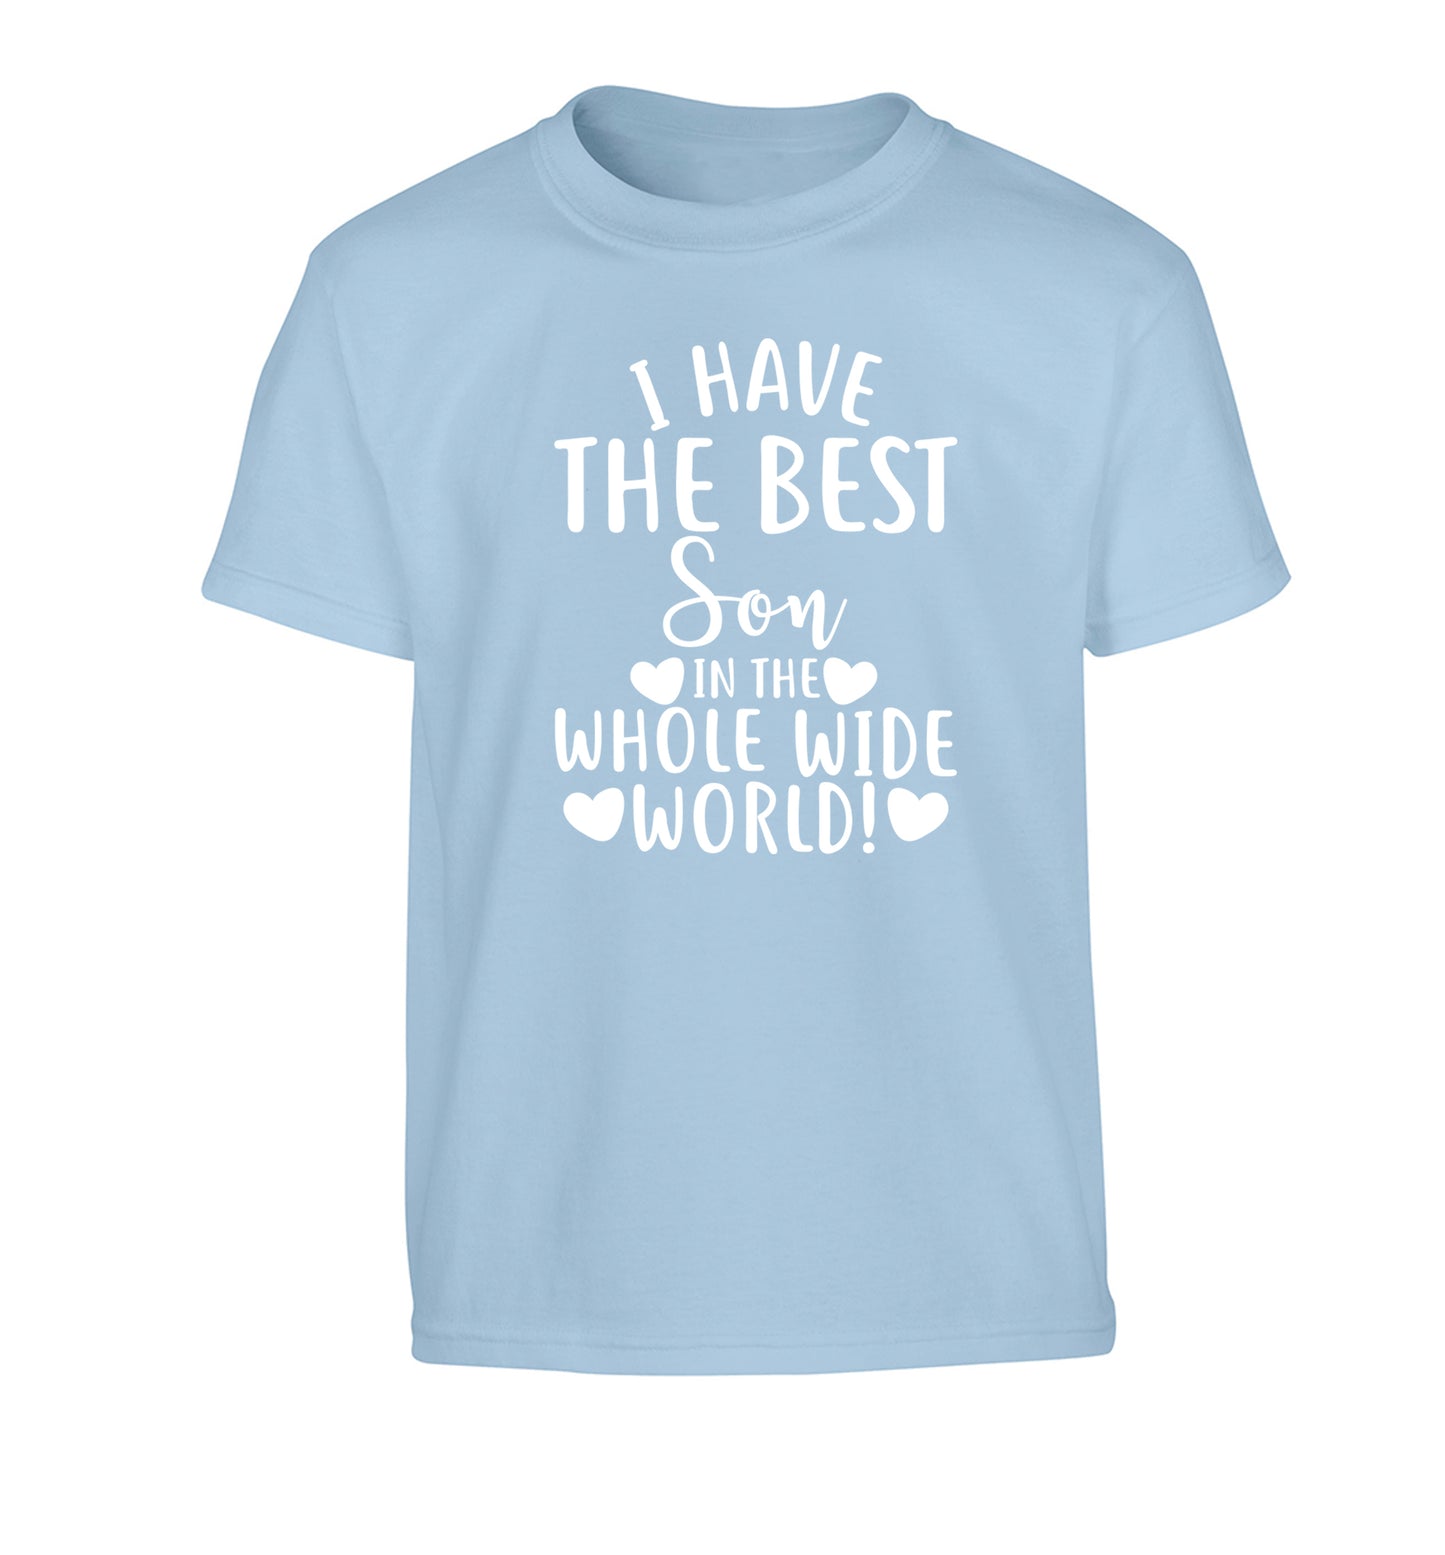 I have the best son in the whole wide world! Children's light blue Tshirt 12-13 Years